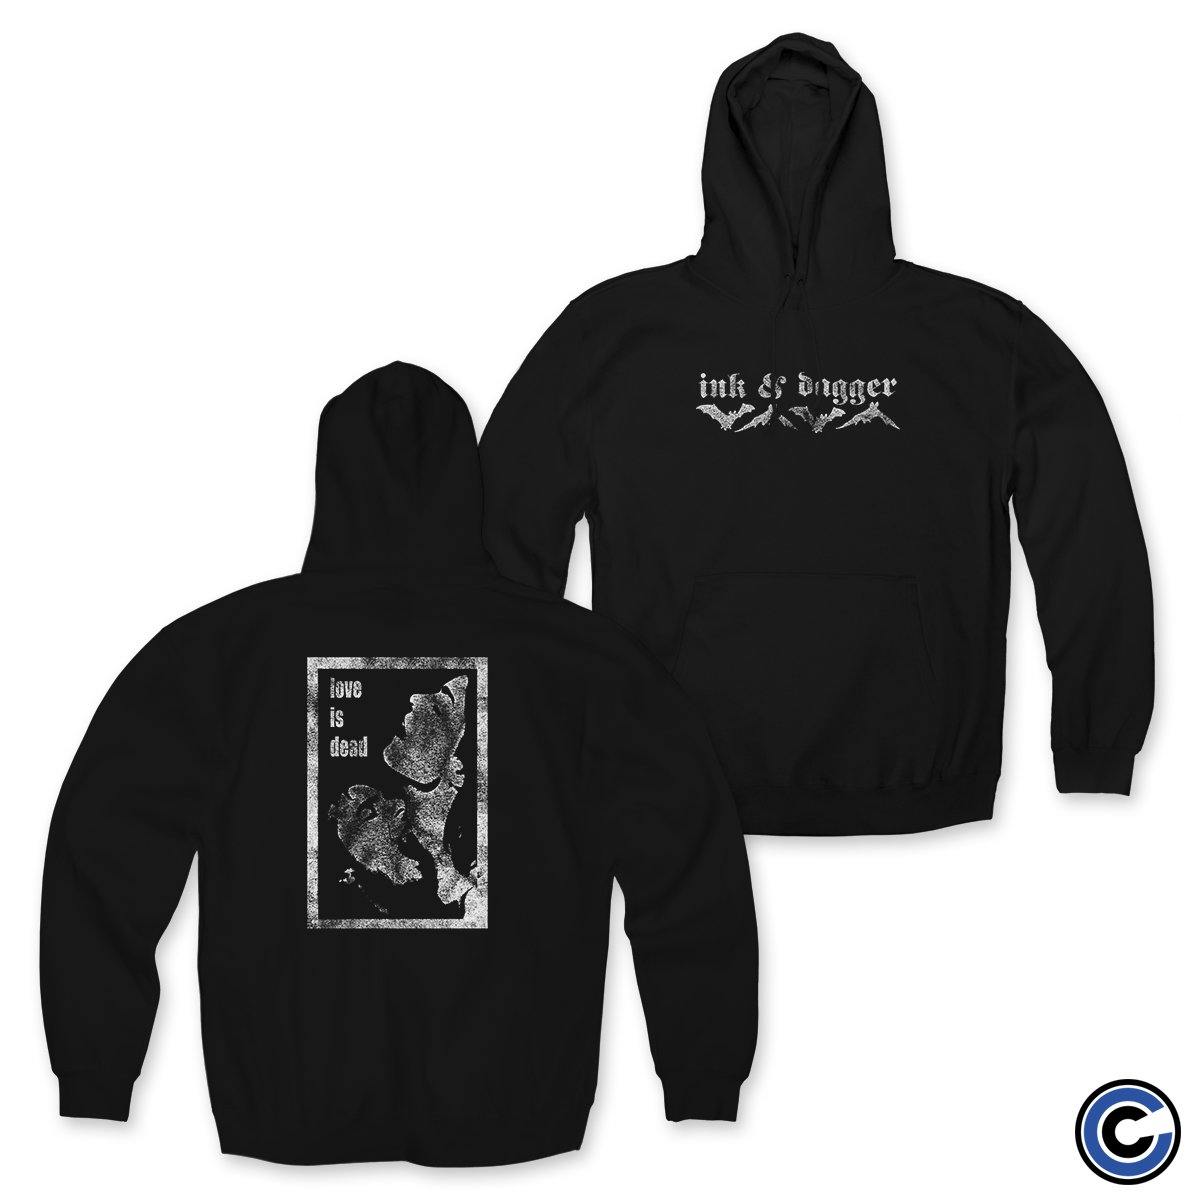 Buy – Ink and Dagger "Bats" Hoodie – Band & Music Merch – Cold Cuts Merch